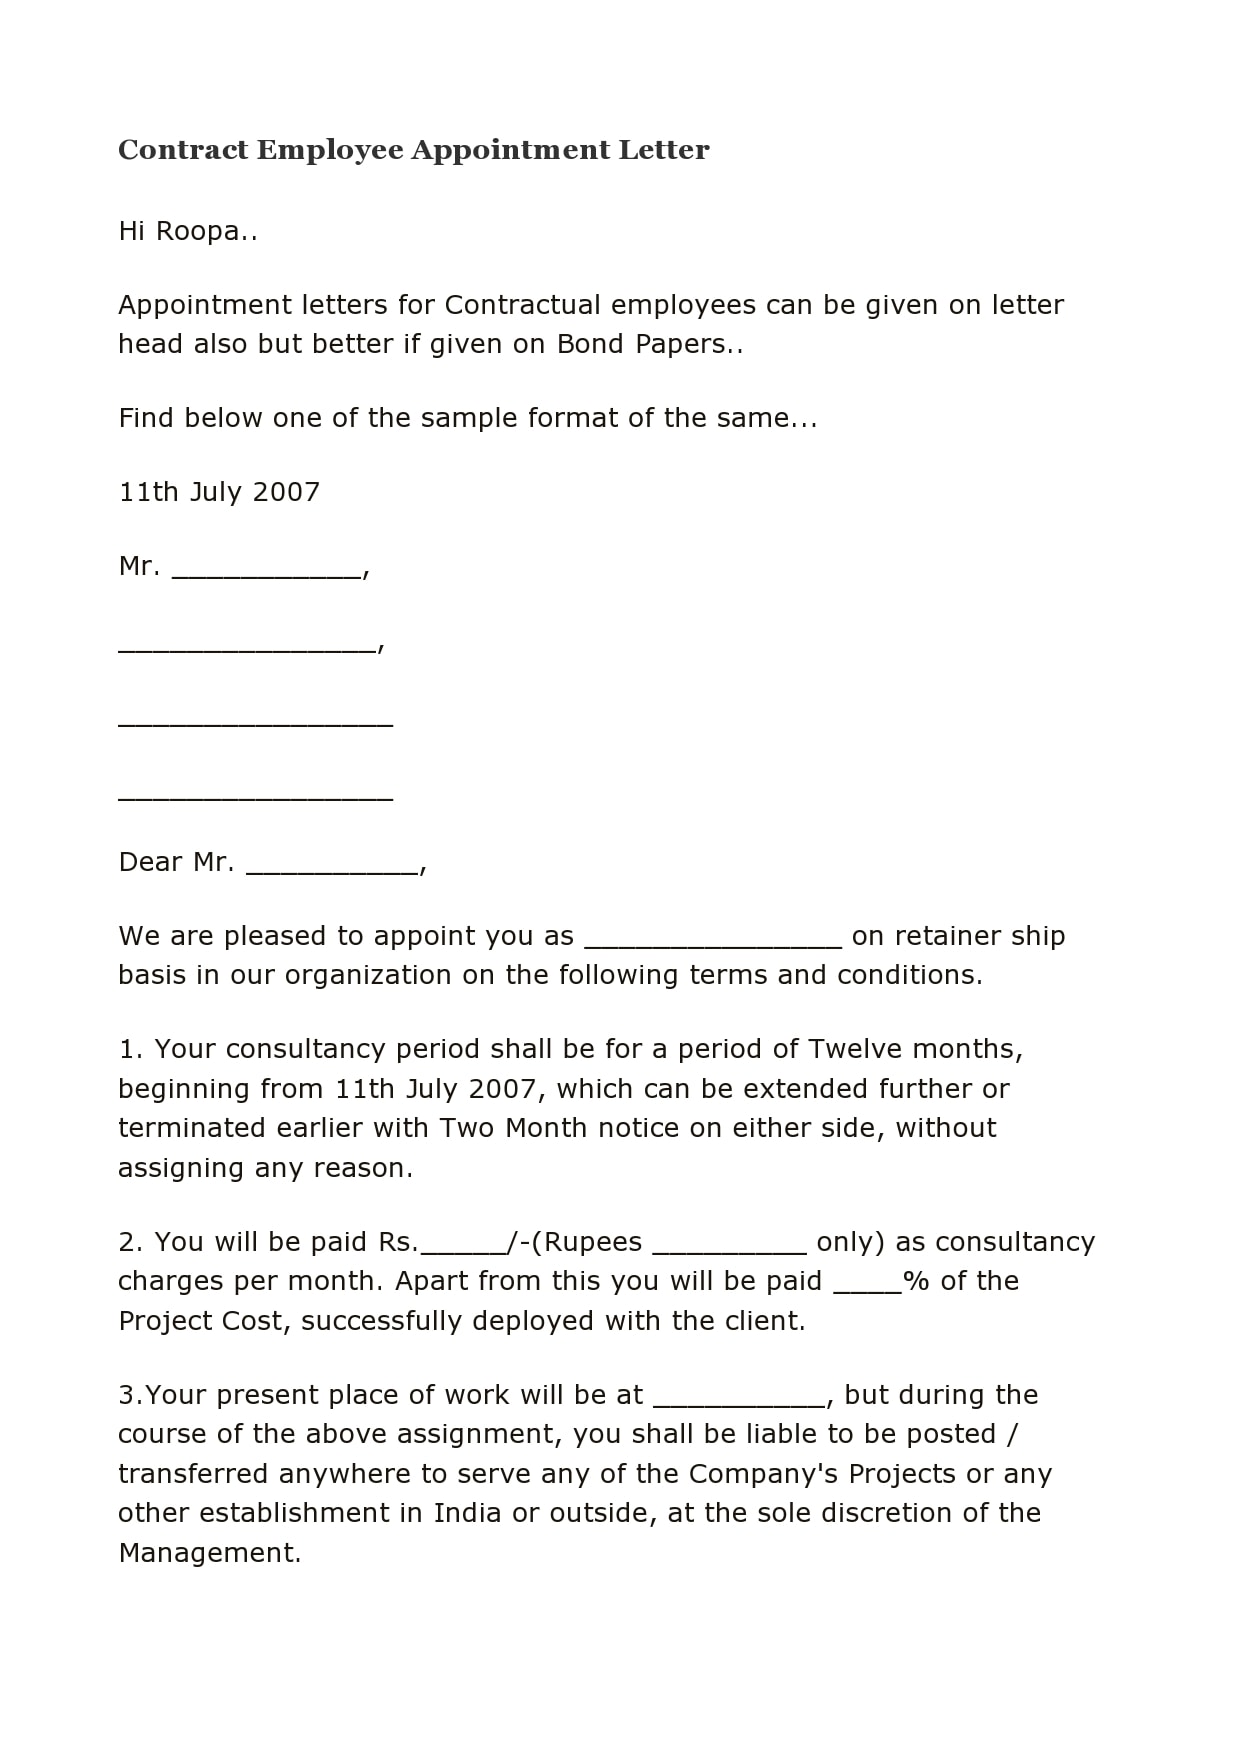 30 Professional Appointment Letter Samples (For Any Job)